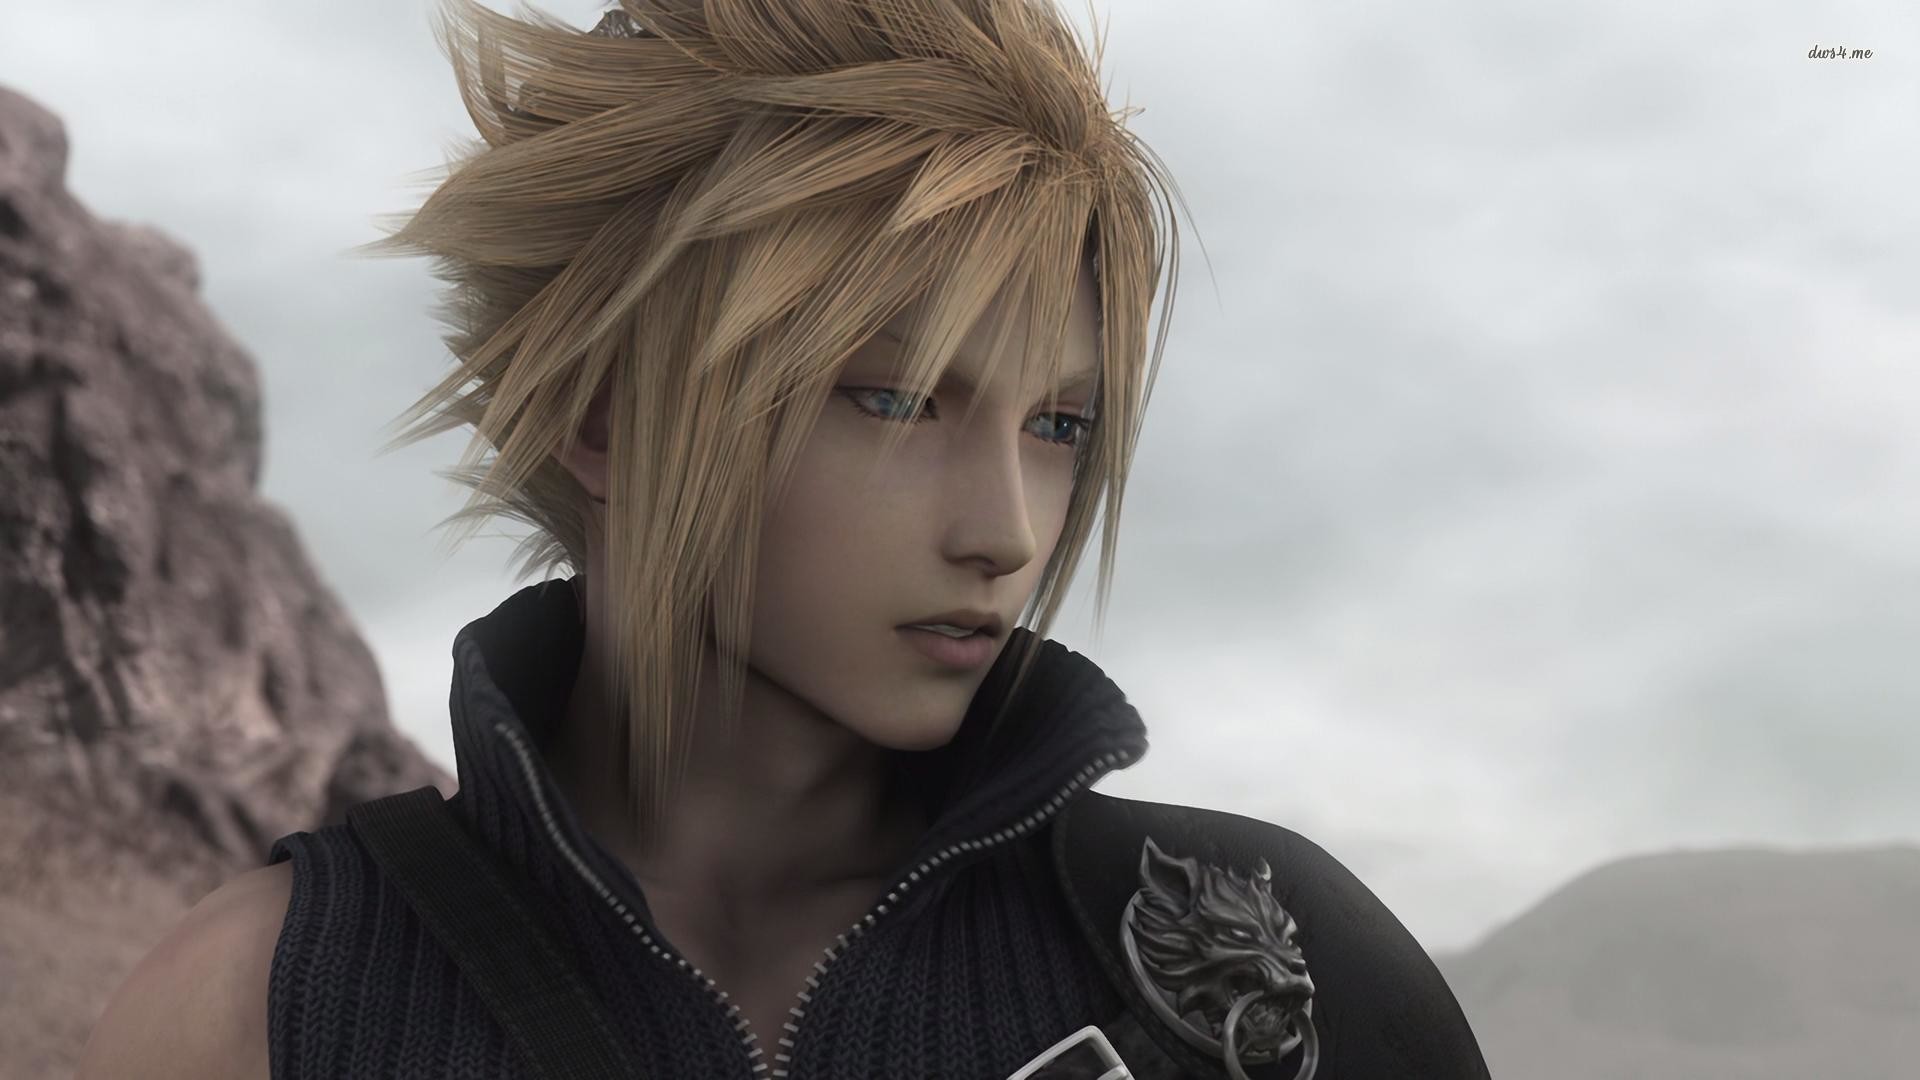 1920x1080  Wallpapers For > Final Fantasy 7 Advent Children Wallpapers